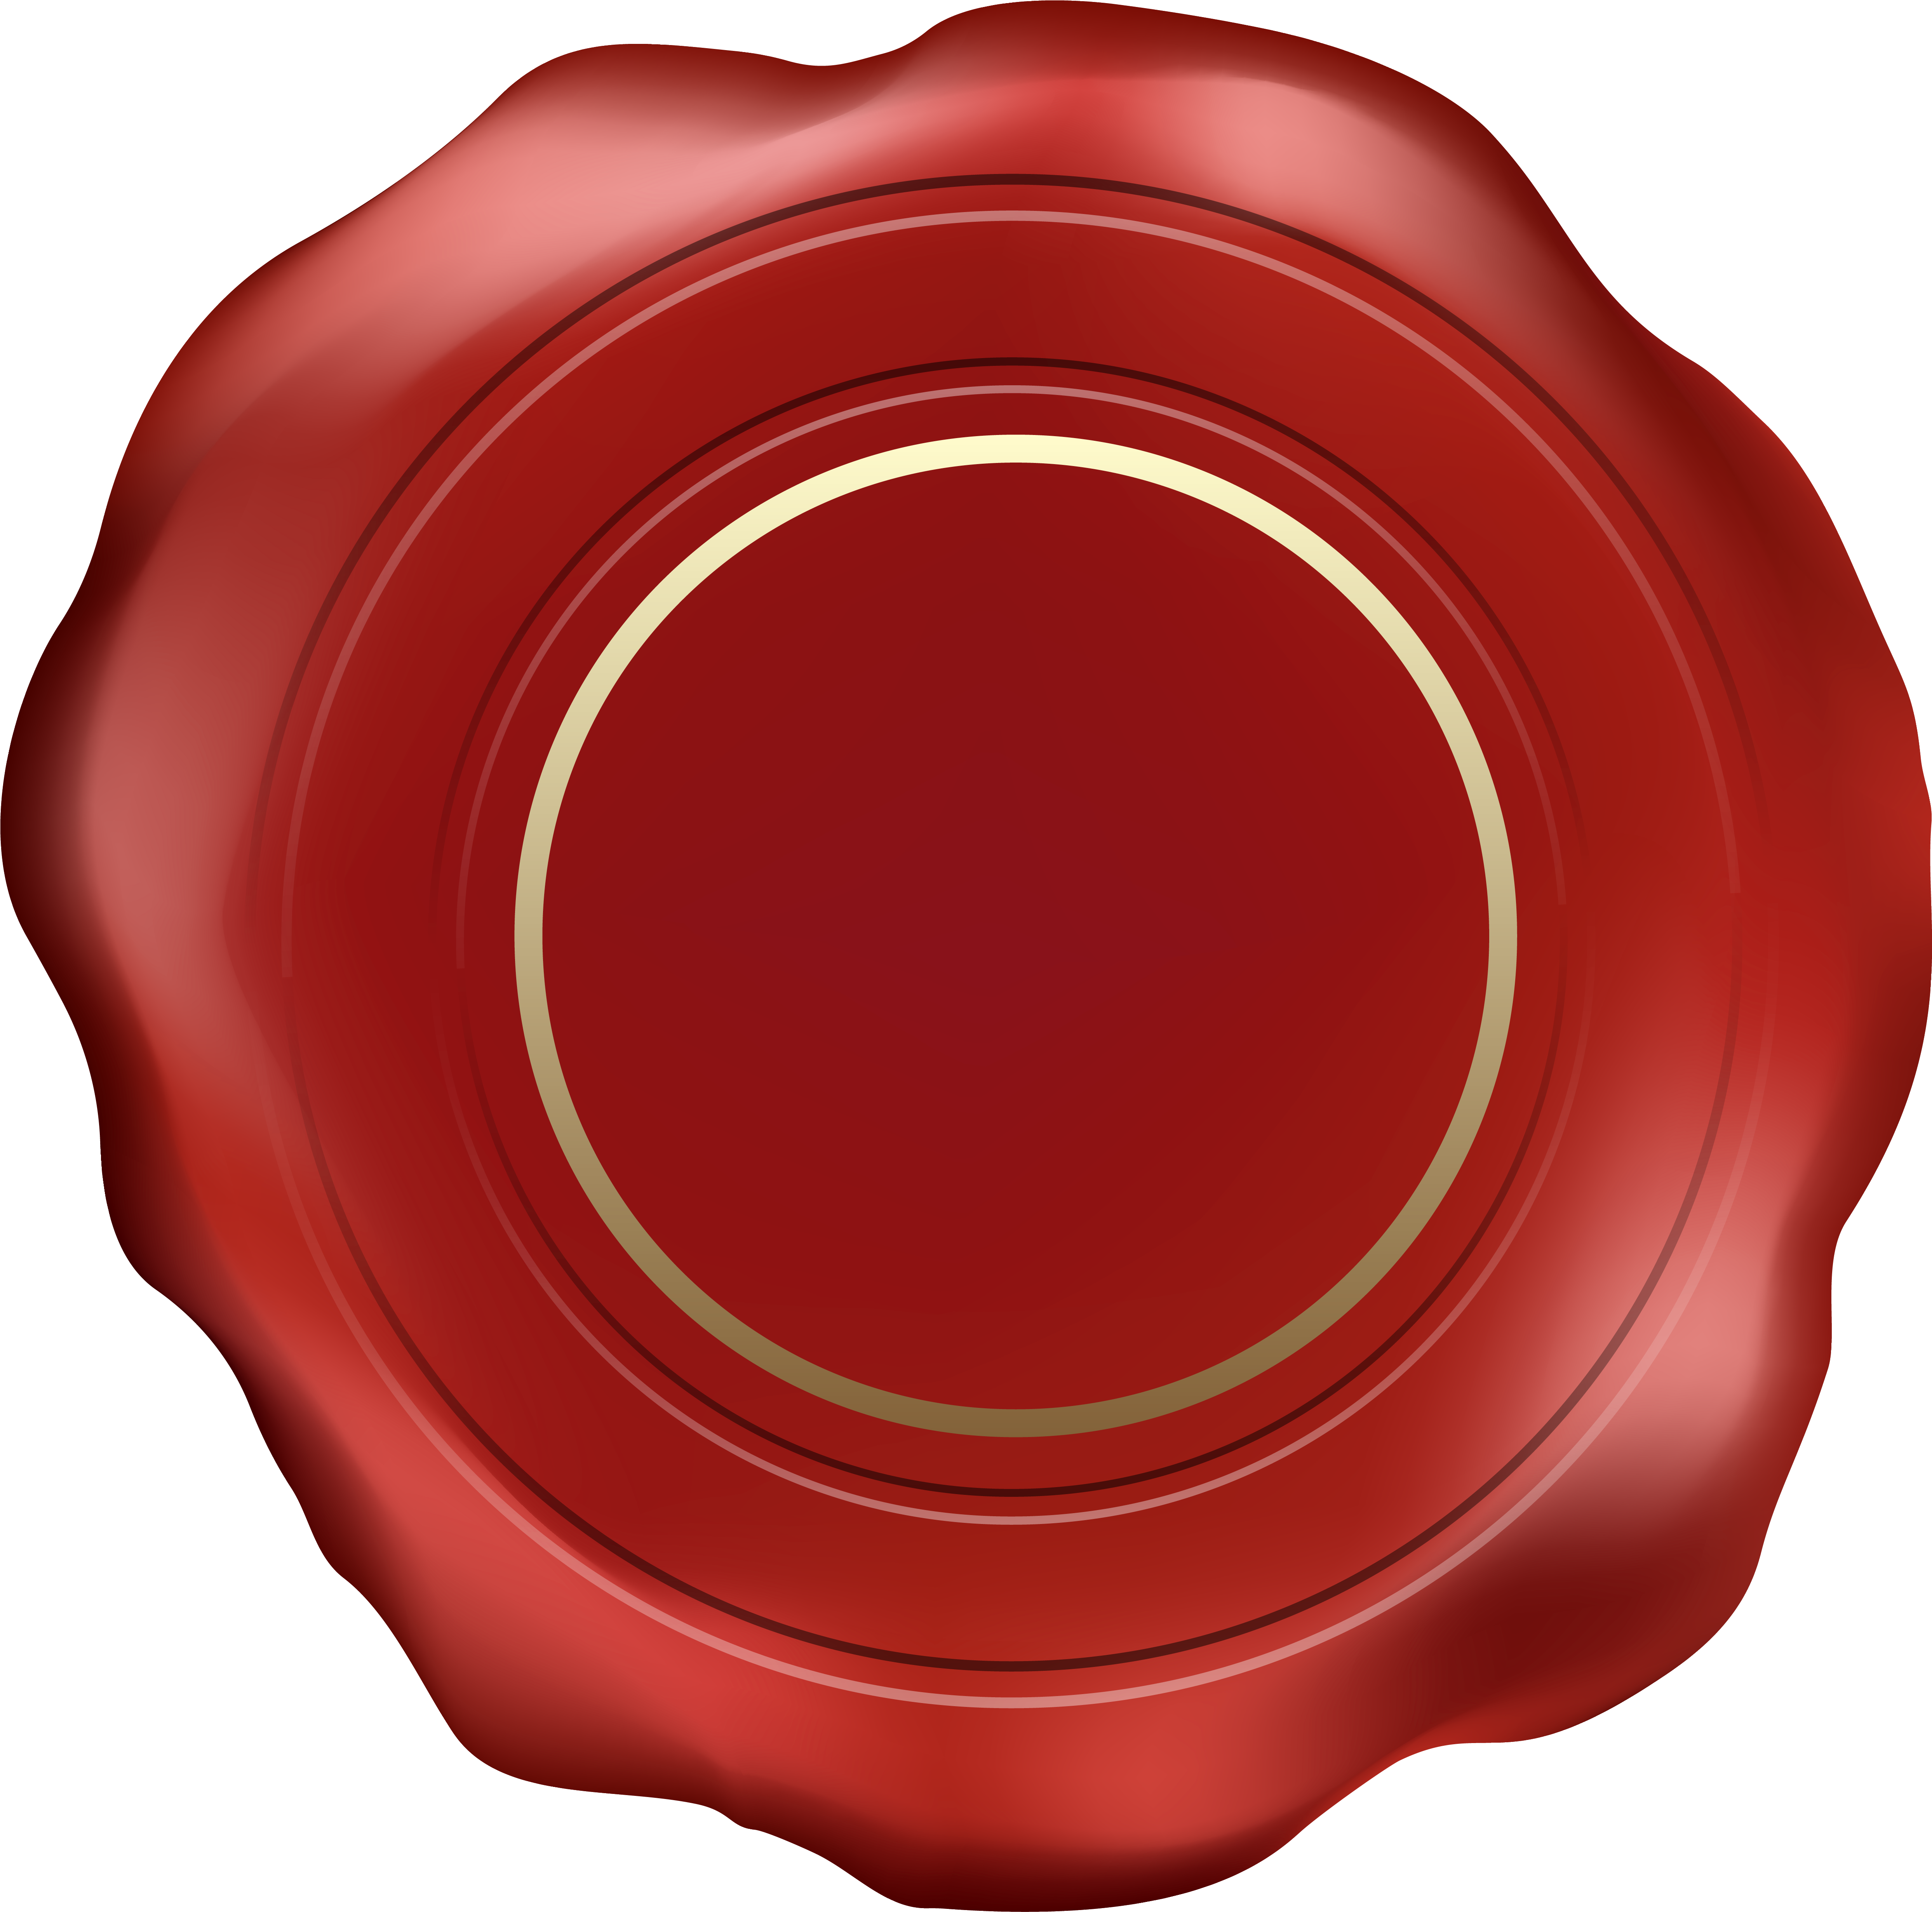 A Red Wax Seal With A Gold Border